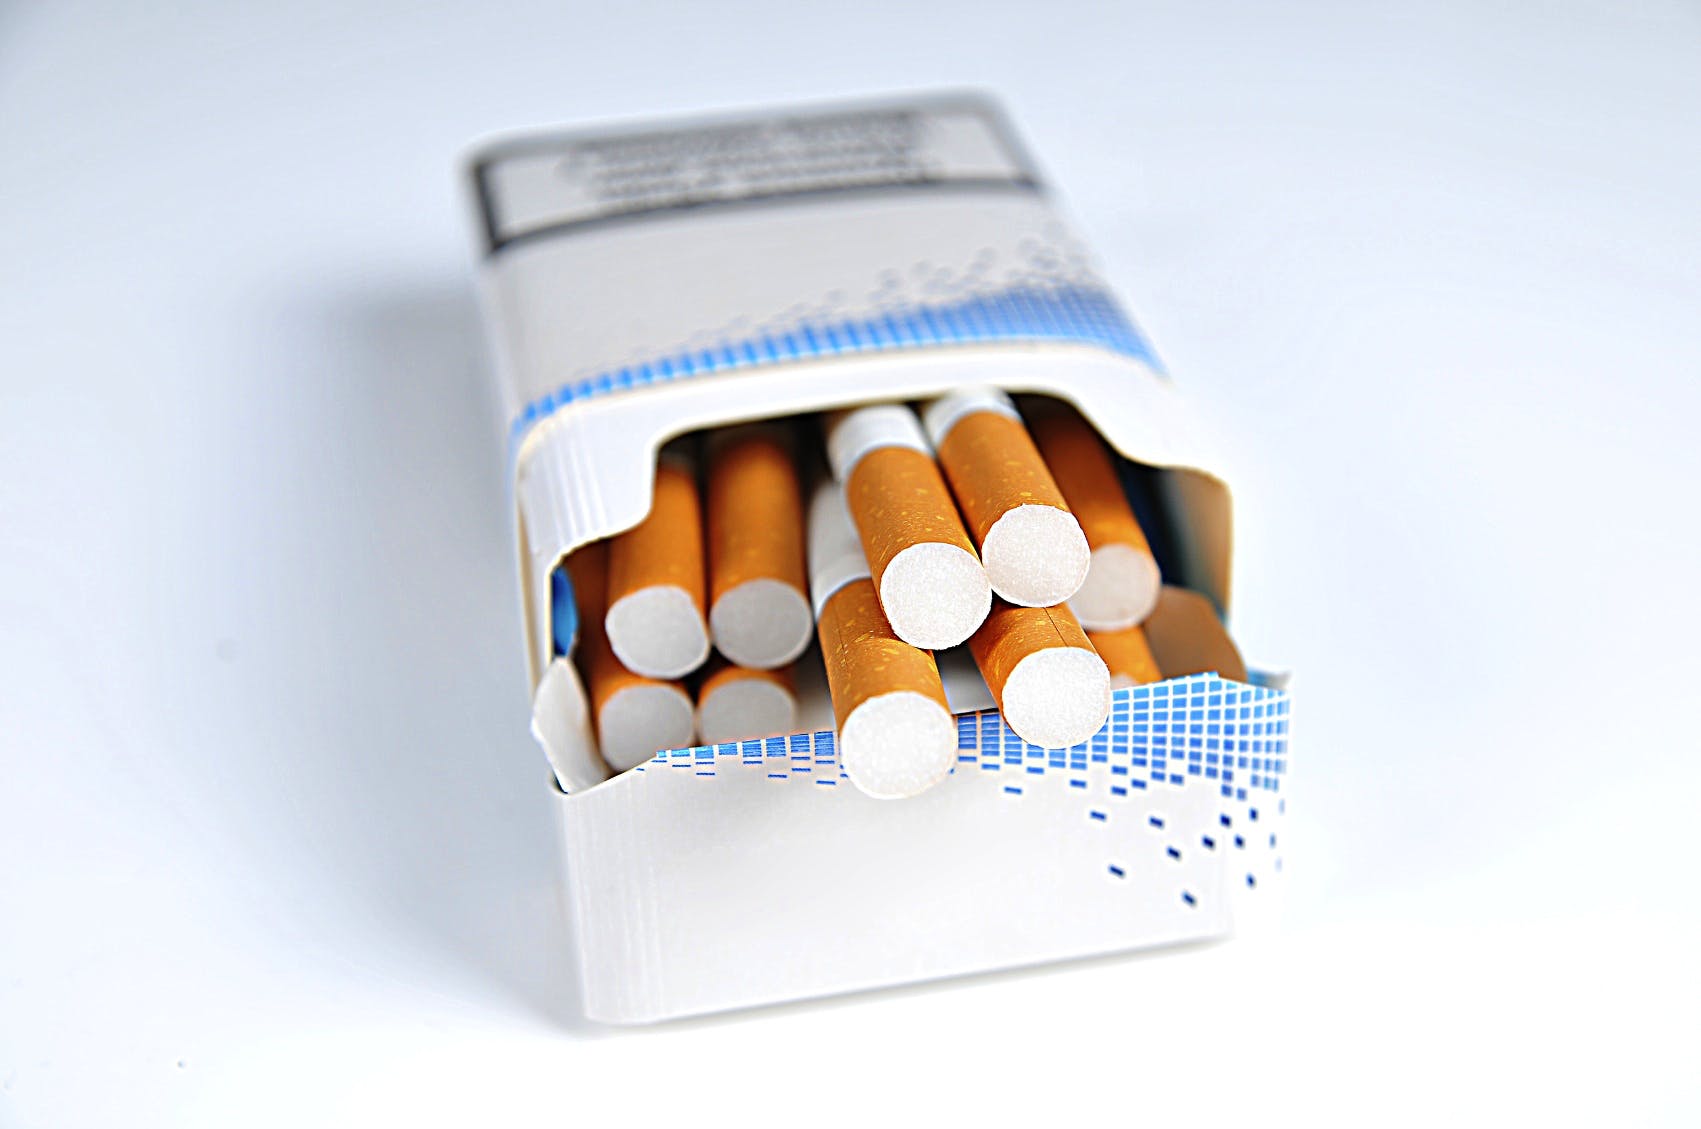 the-price-of-cigarettes-set-to-rise-above-10-before-the-end-of-2017